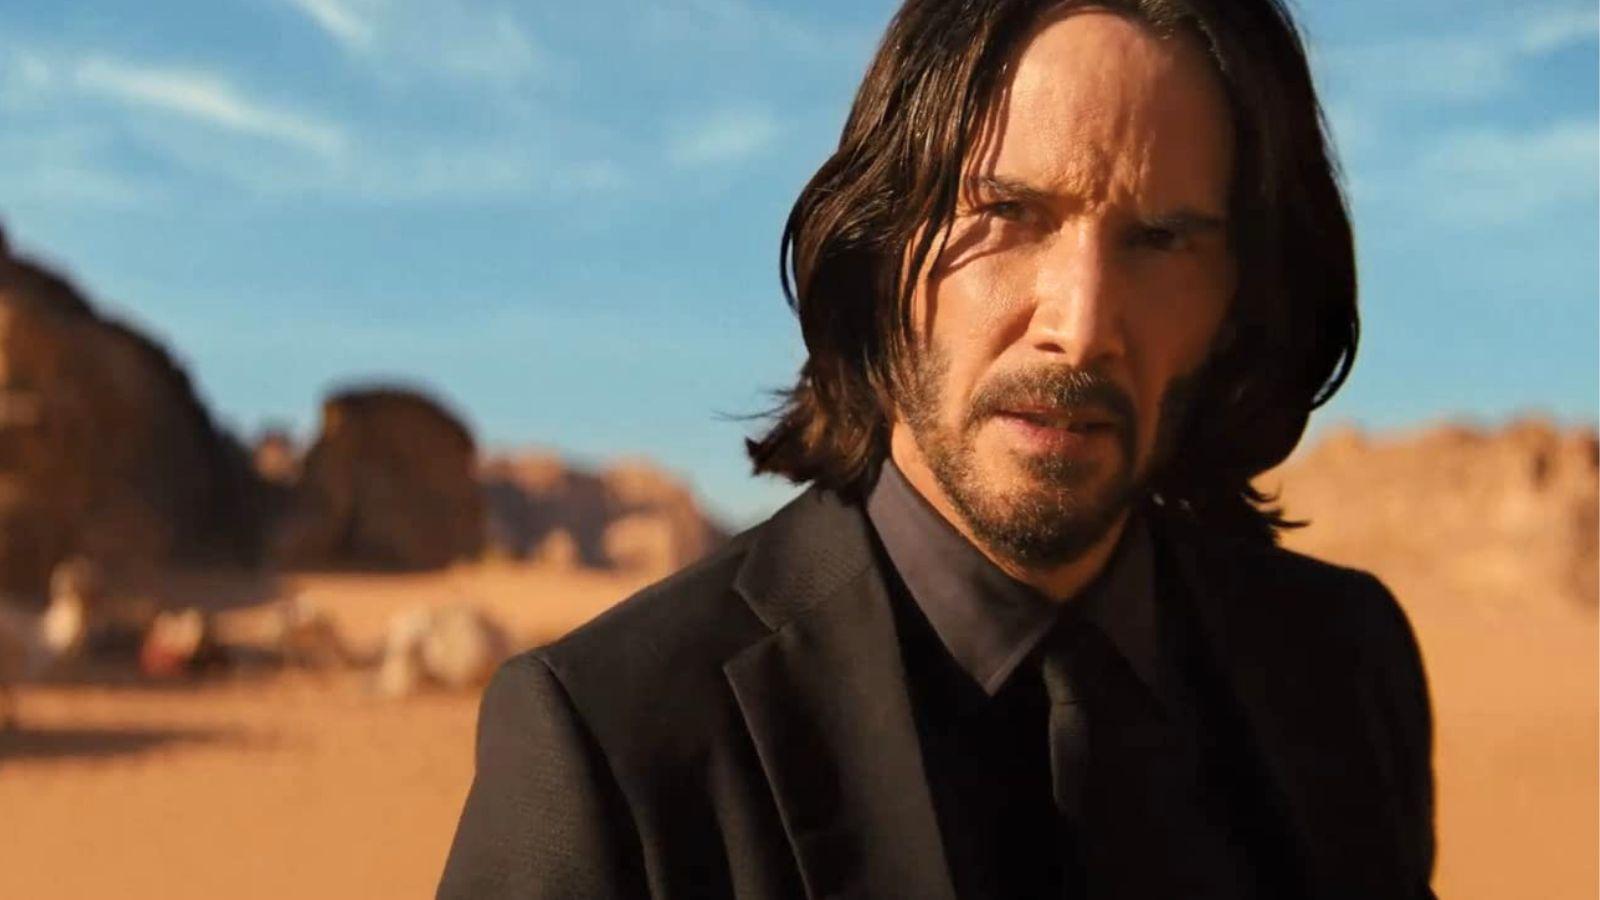 Keanu Reeves as John Wick in Chapter 4. He stands in the desert.